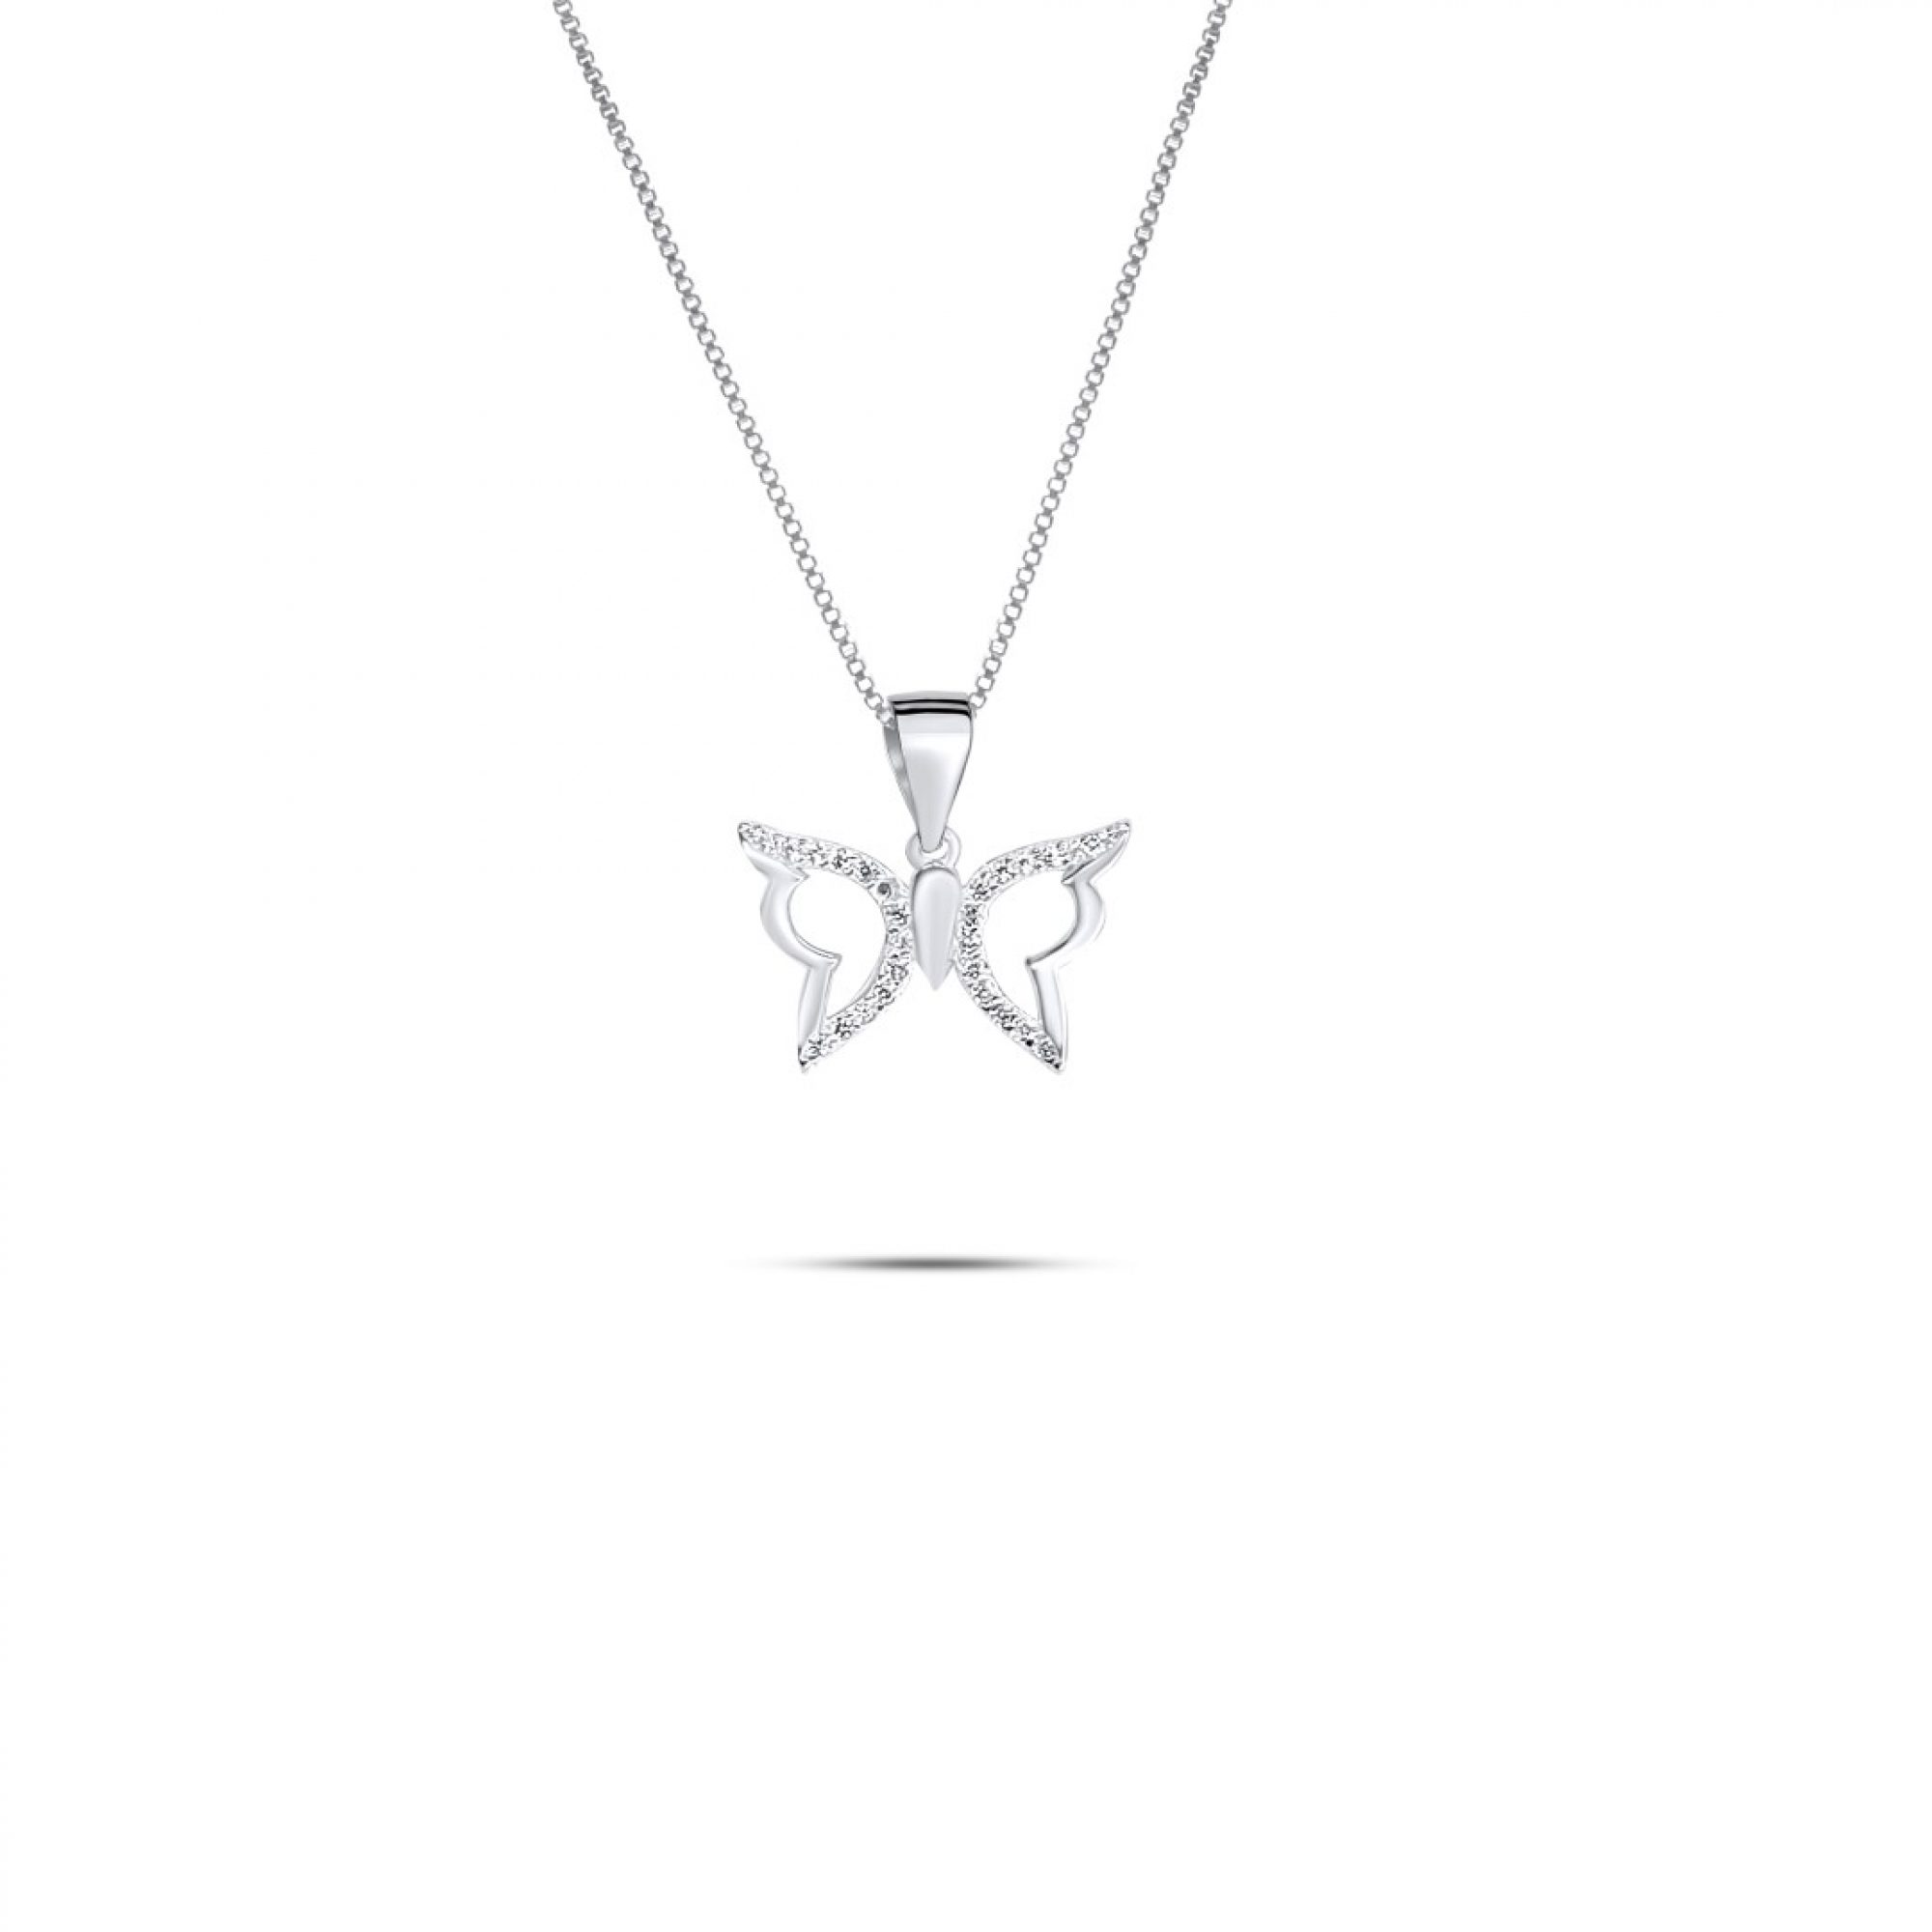 Butterfly necklace with zircon stones